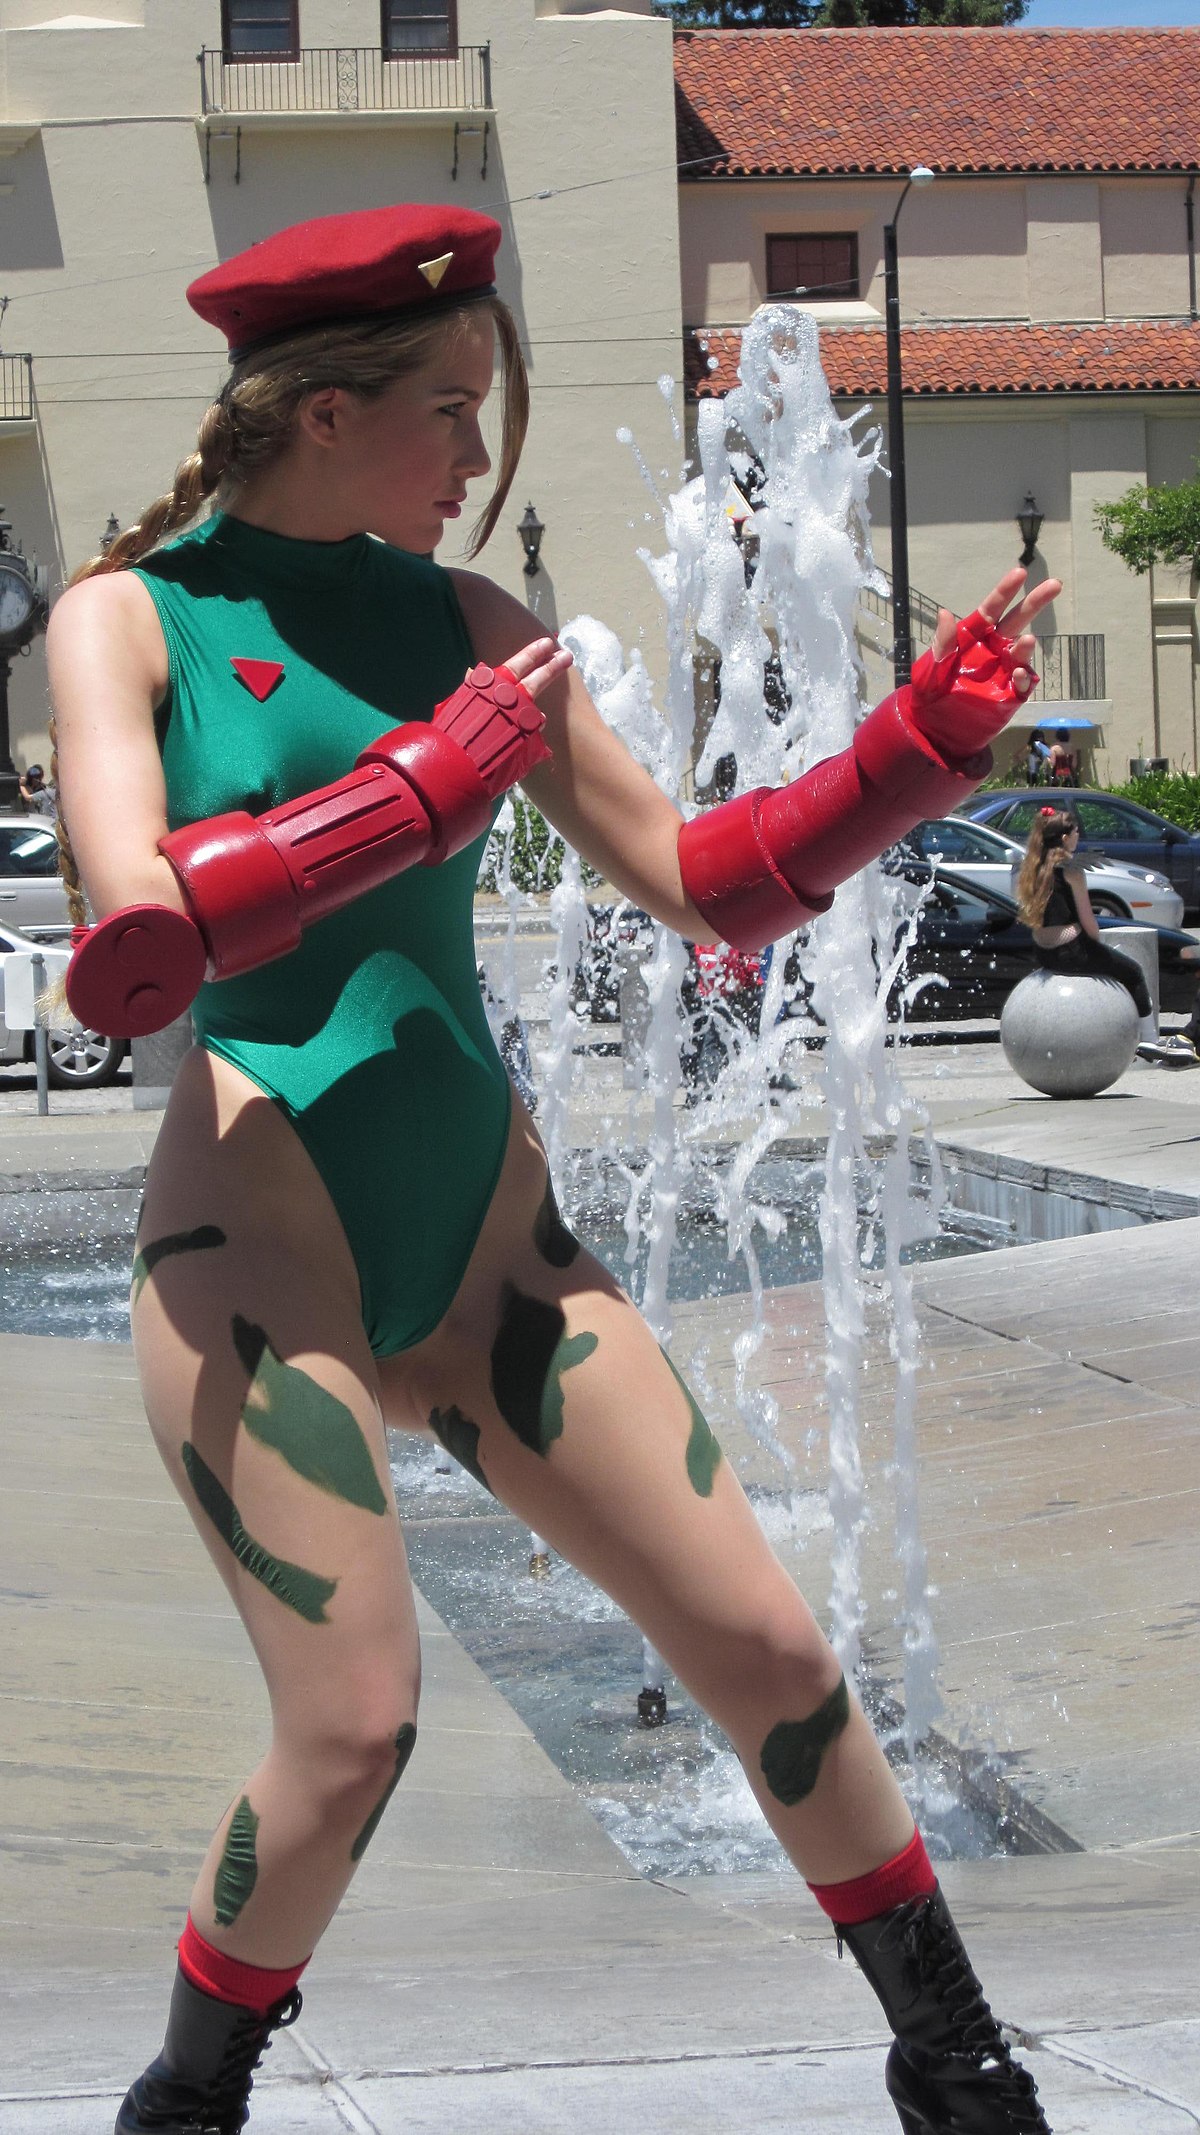 dawn sedlock recommends cammy street fighter cosplay pic